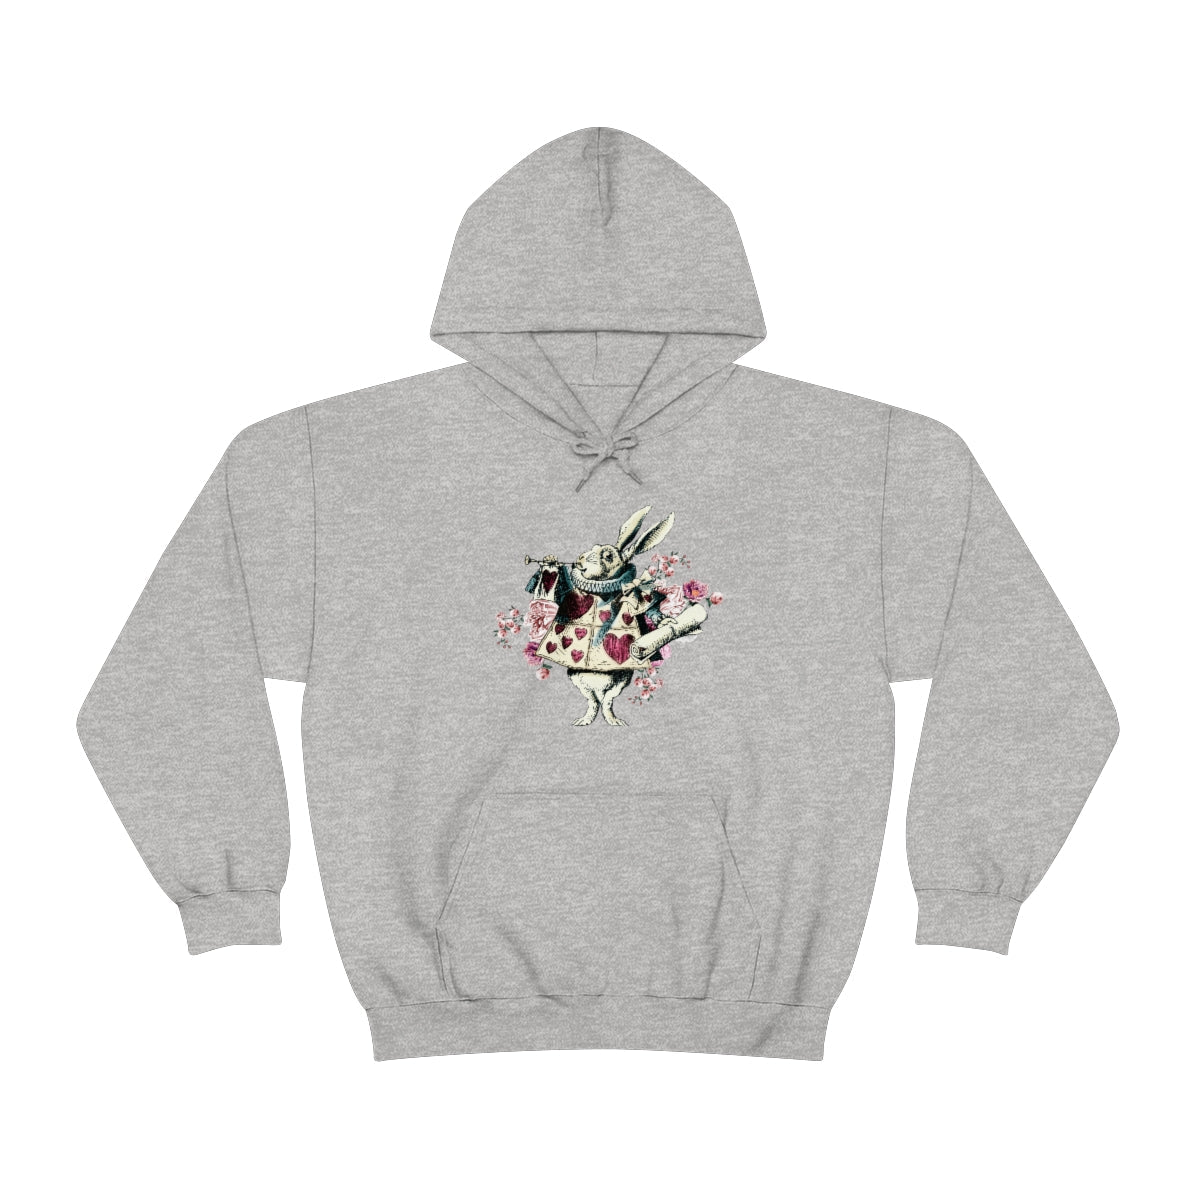 Pullover Hoodies-Alice in Wonderland Gifts 43 Colorful